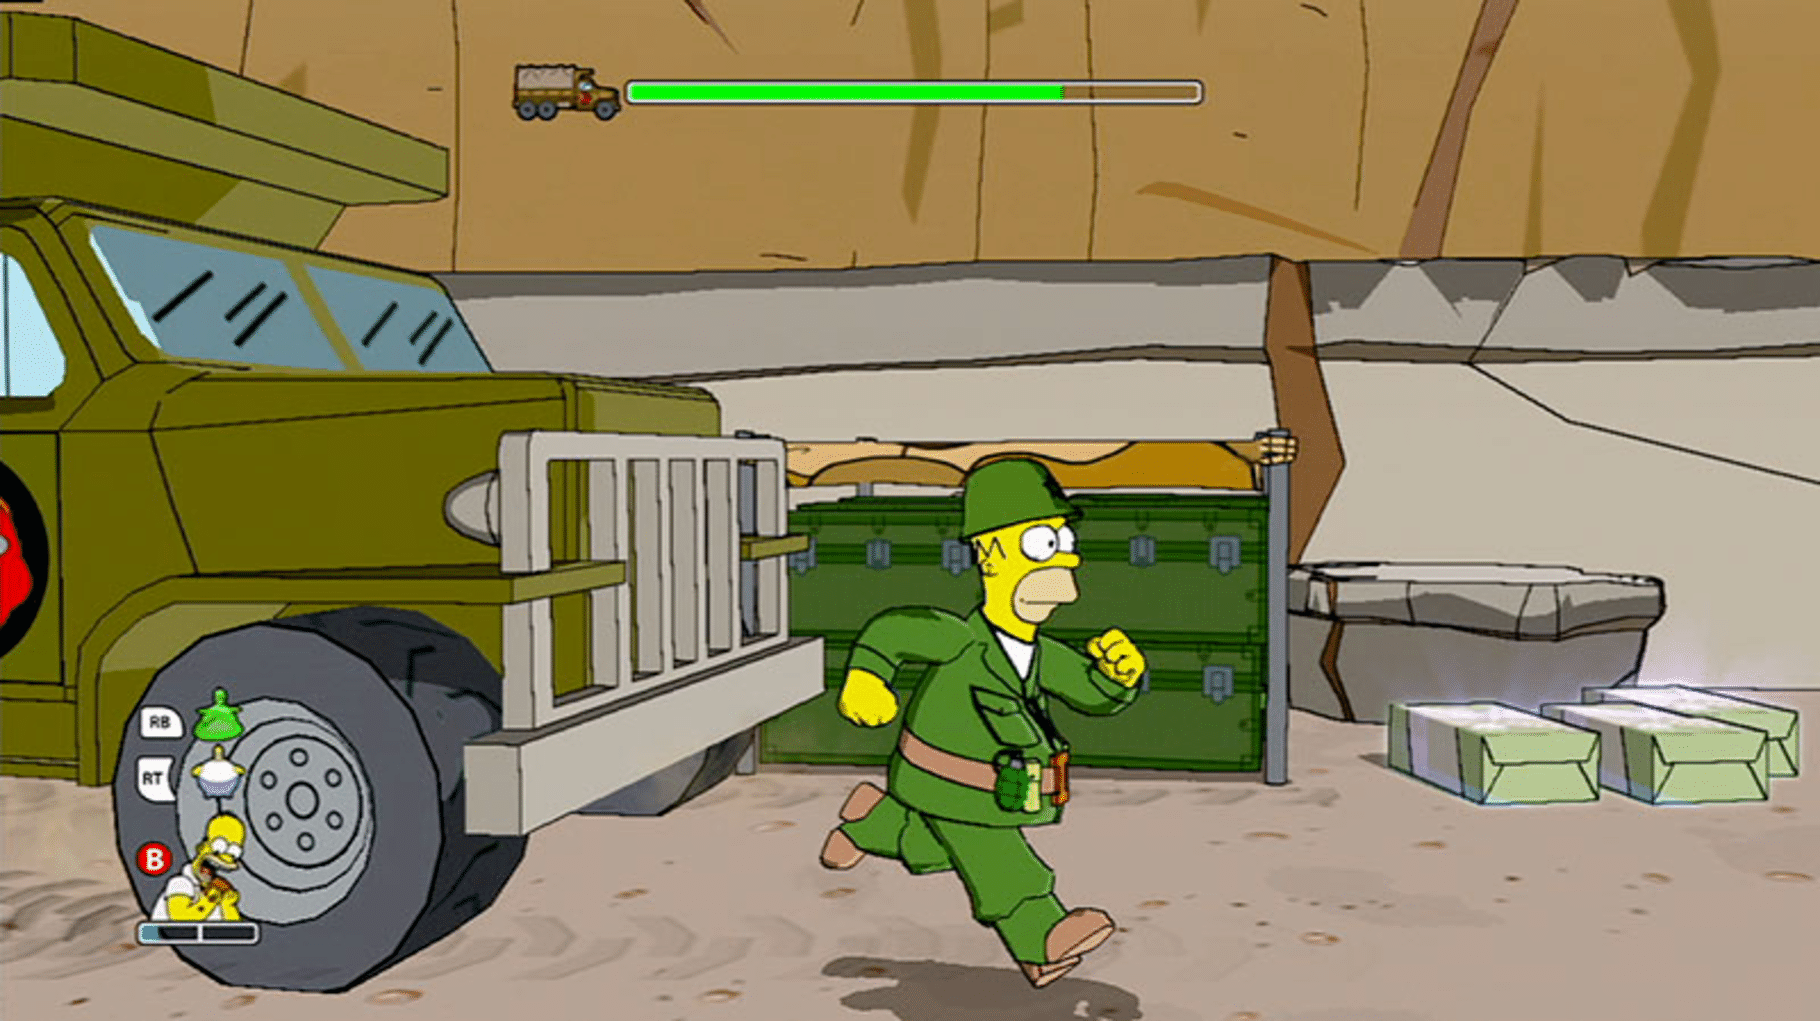 The Simpsons Game (2007)